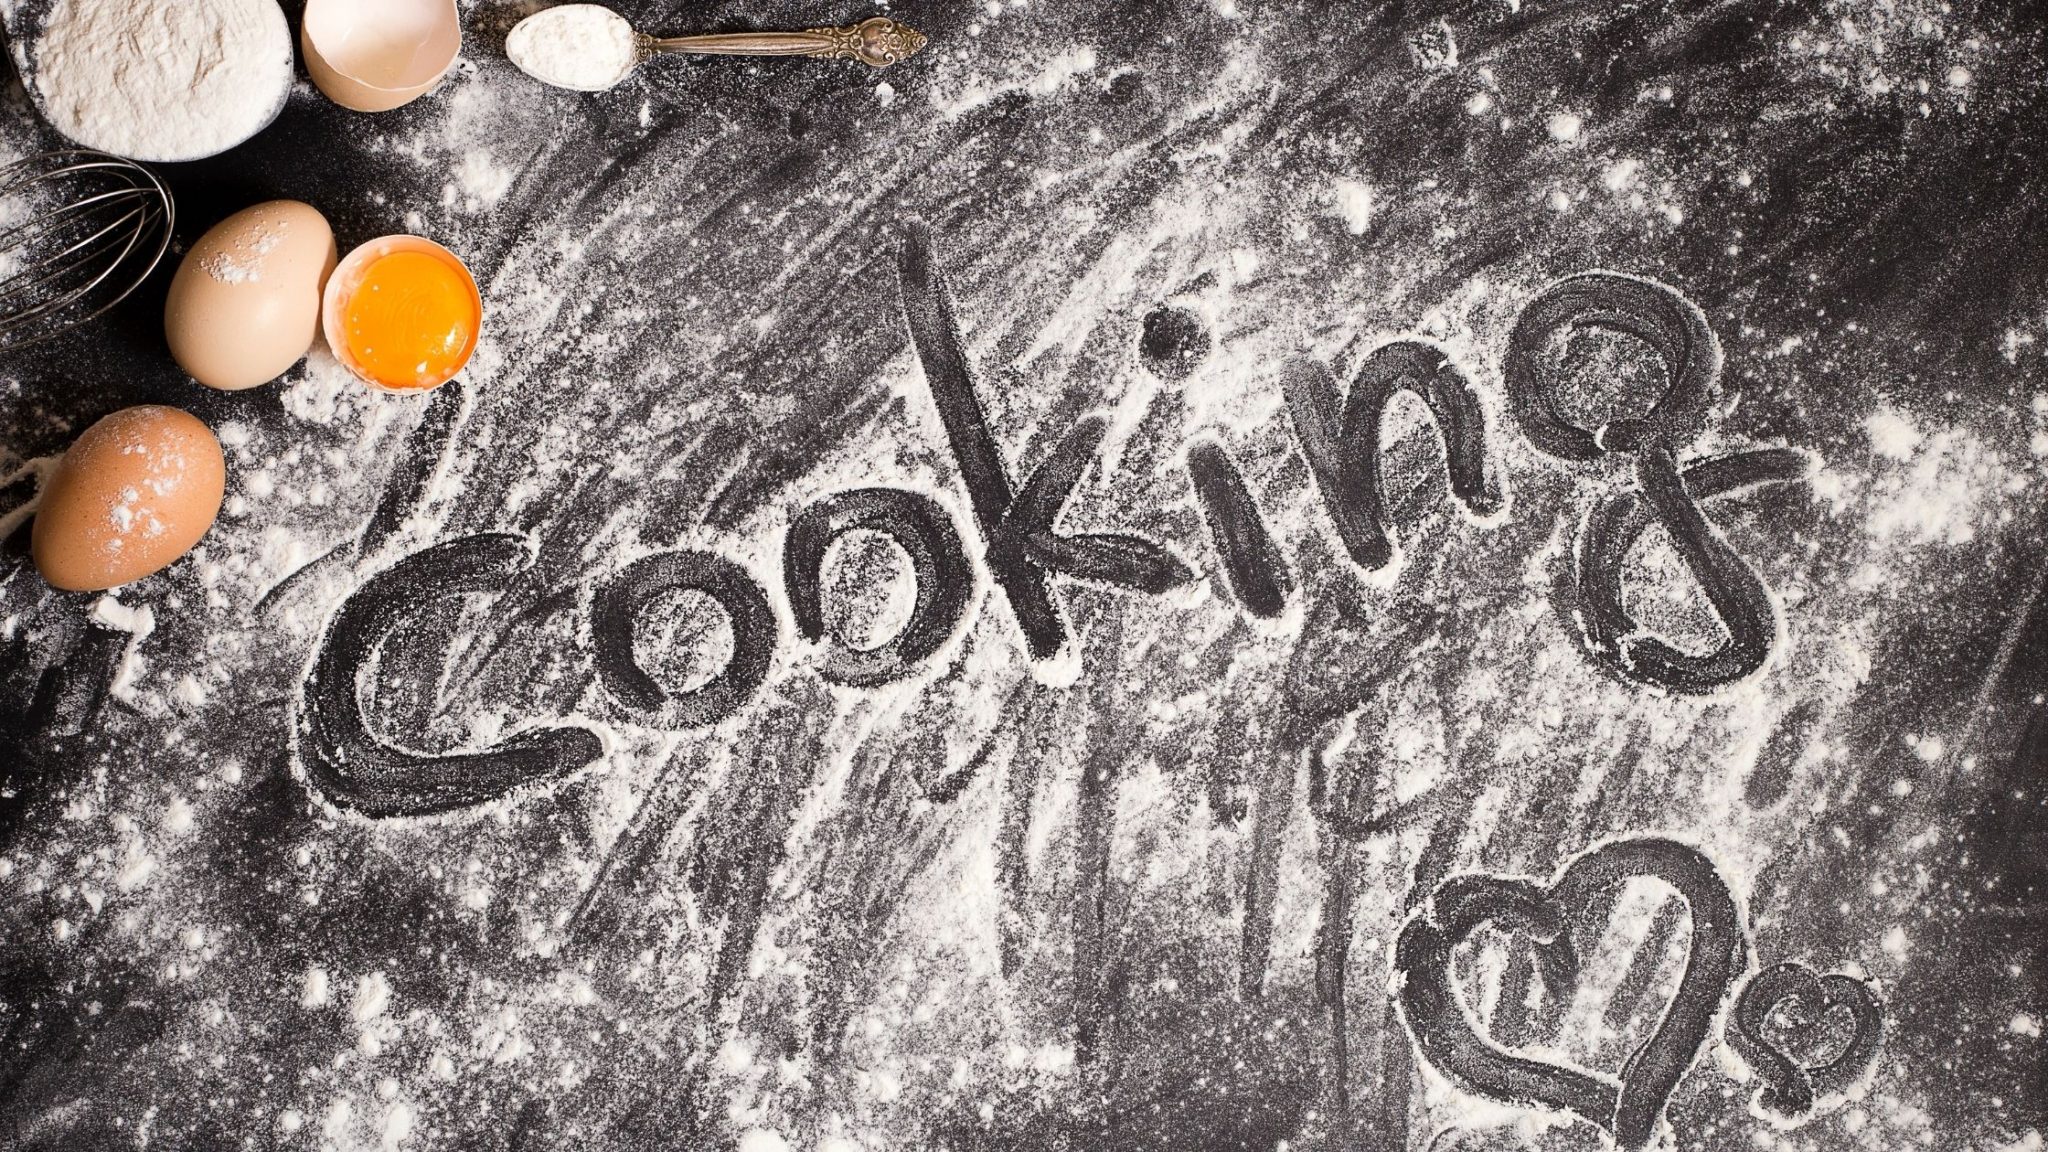 Read more about the article Working on Cooking Skills With Teens